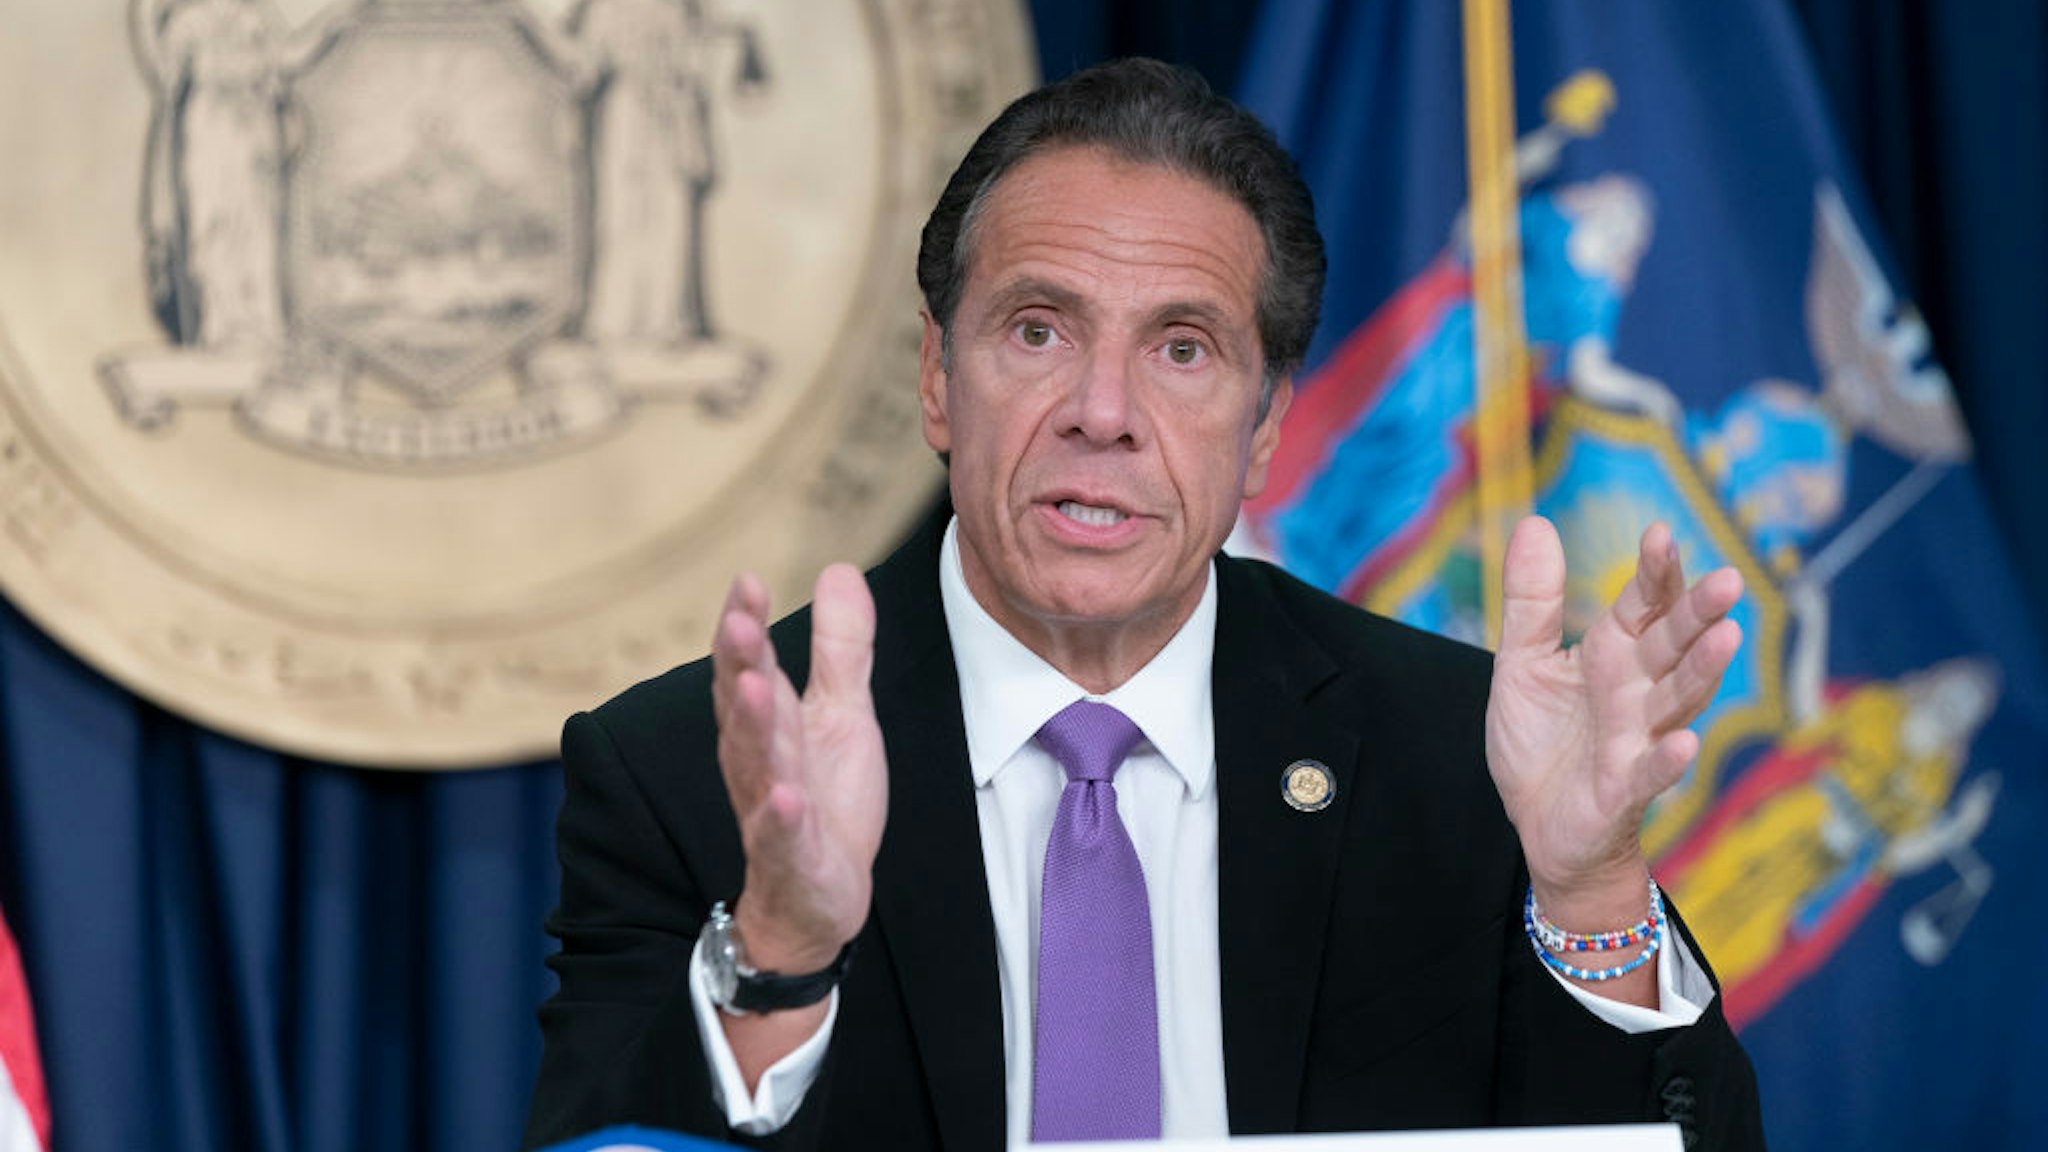 Governor Andrew Cuomo holds press briefing and announcement at office on 3rd Avenue in Manhattan.